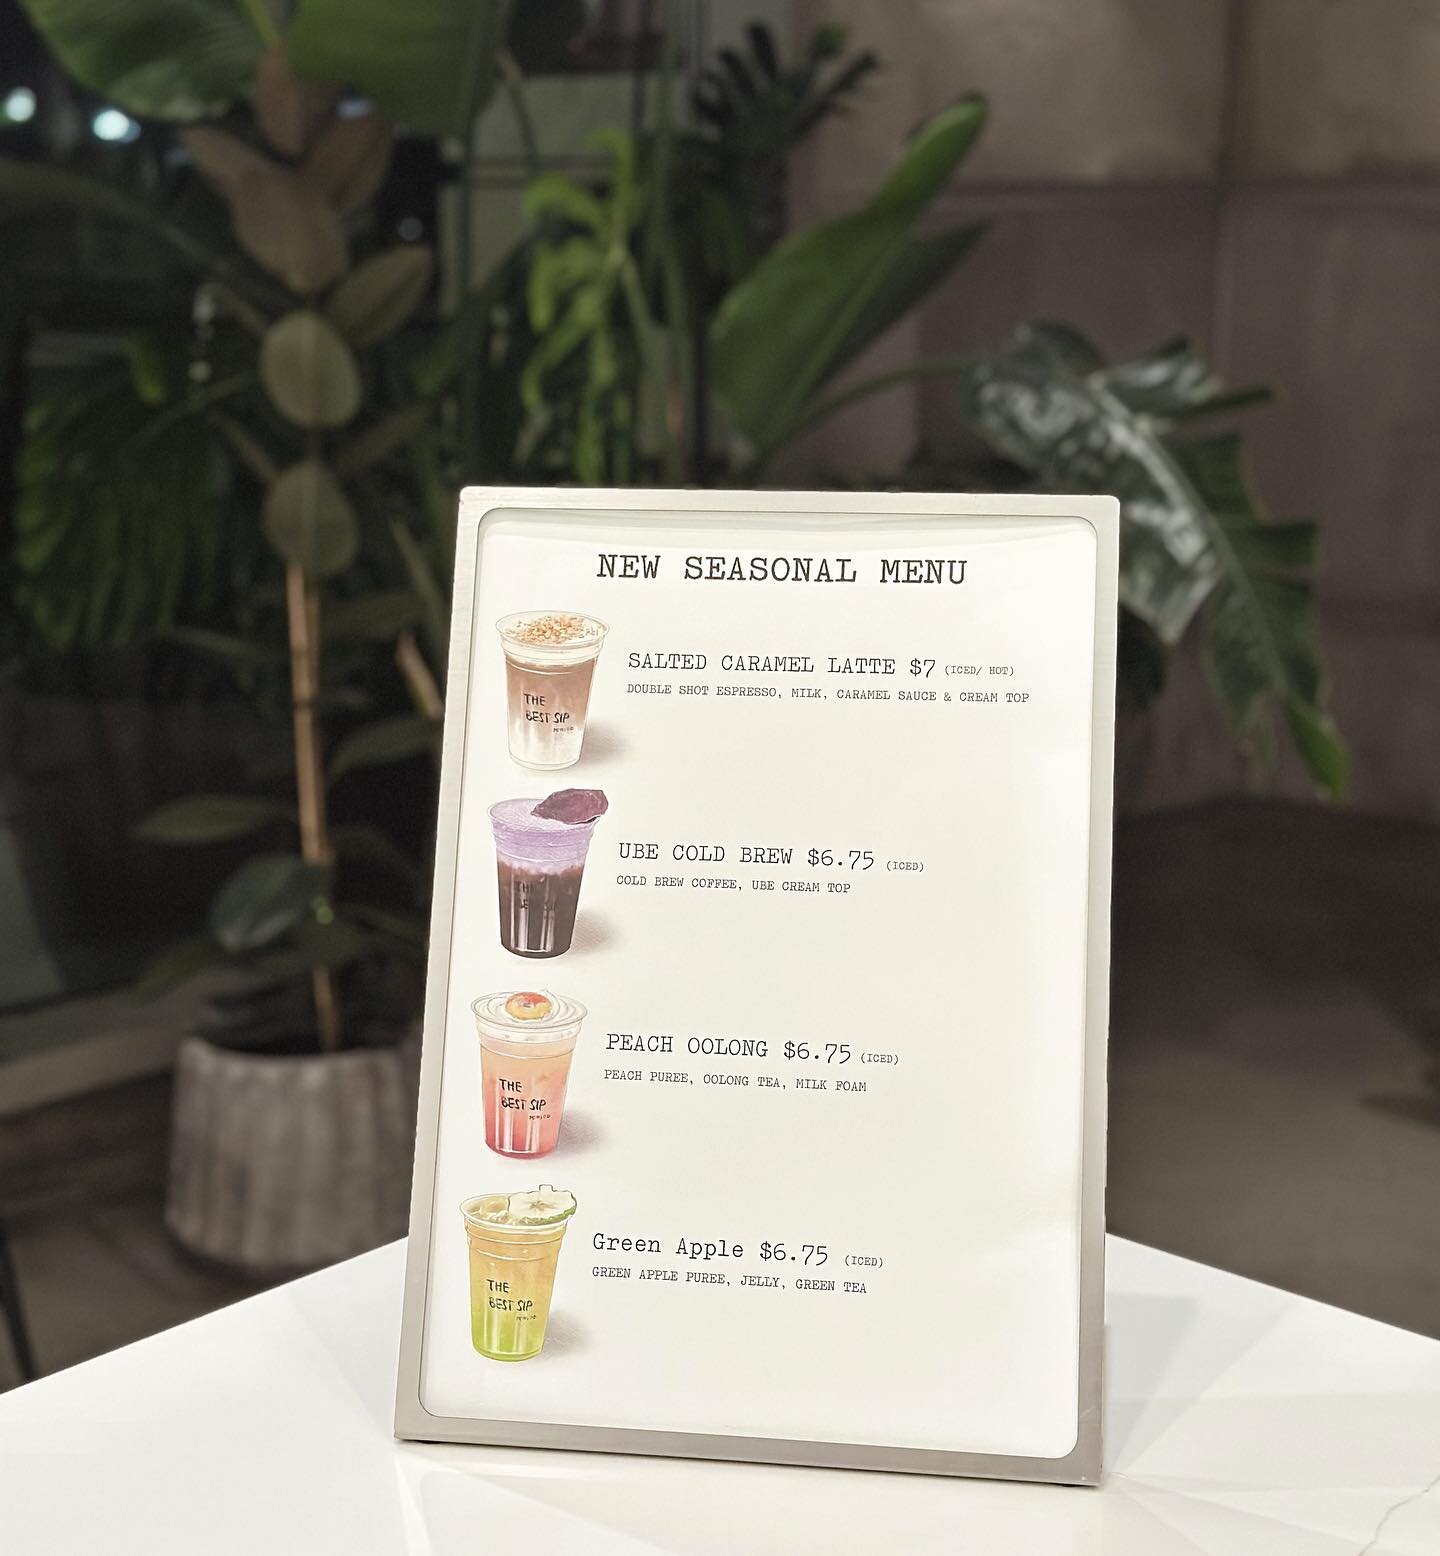 &quot;📣 Menu Makeover! Our fresh seasonal drinks debut tomorrow. Explore the flavors! 🍹📖 #SeasonalSips&quot;

- Salted Caramel Latte 🤎
- Ube Cold Brew 🍠
- Peach Oolong 🍑
- Green Apple 🍏 

See you guys tmr! ✨✨

#coffee #coffeelover #newseasonal